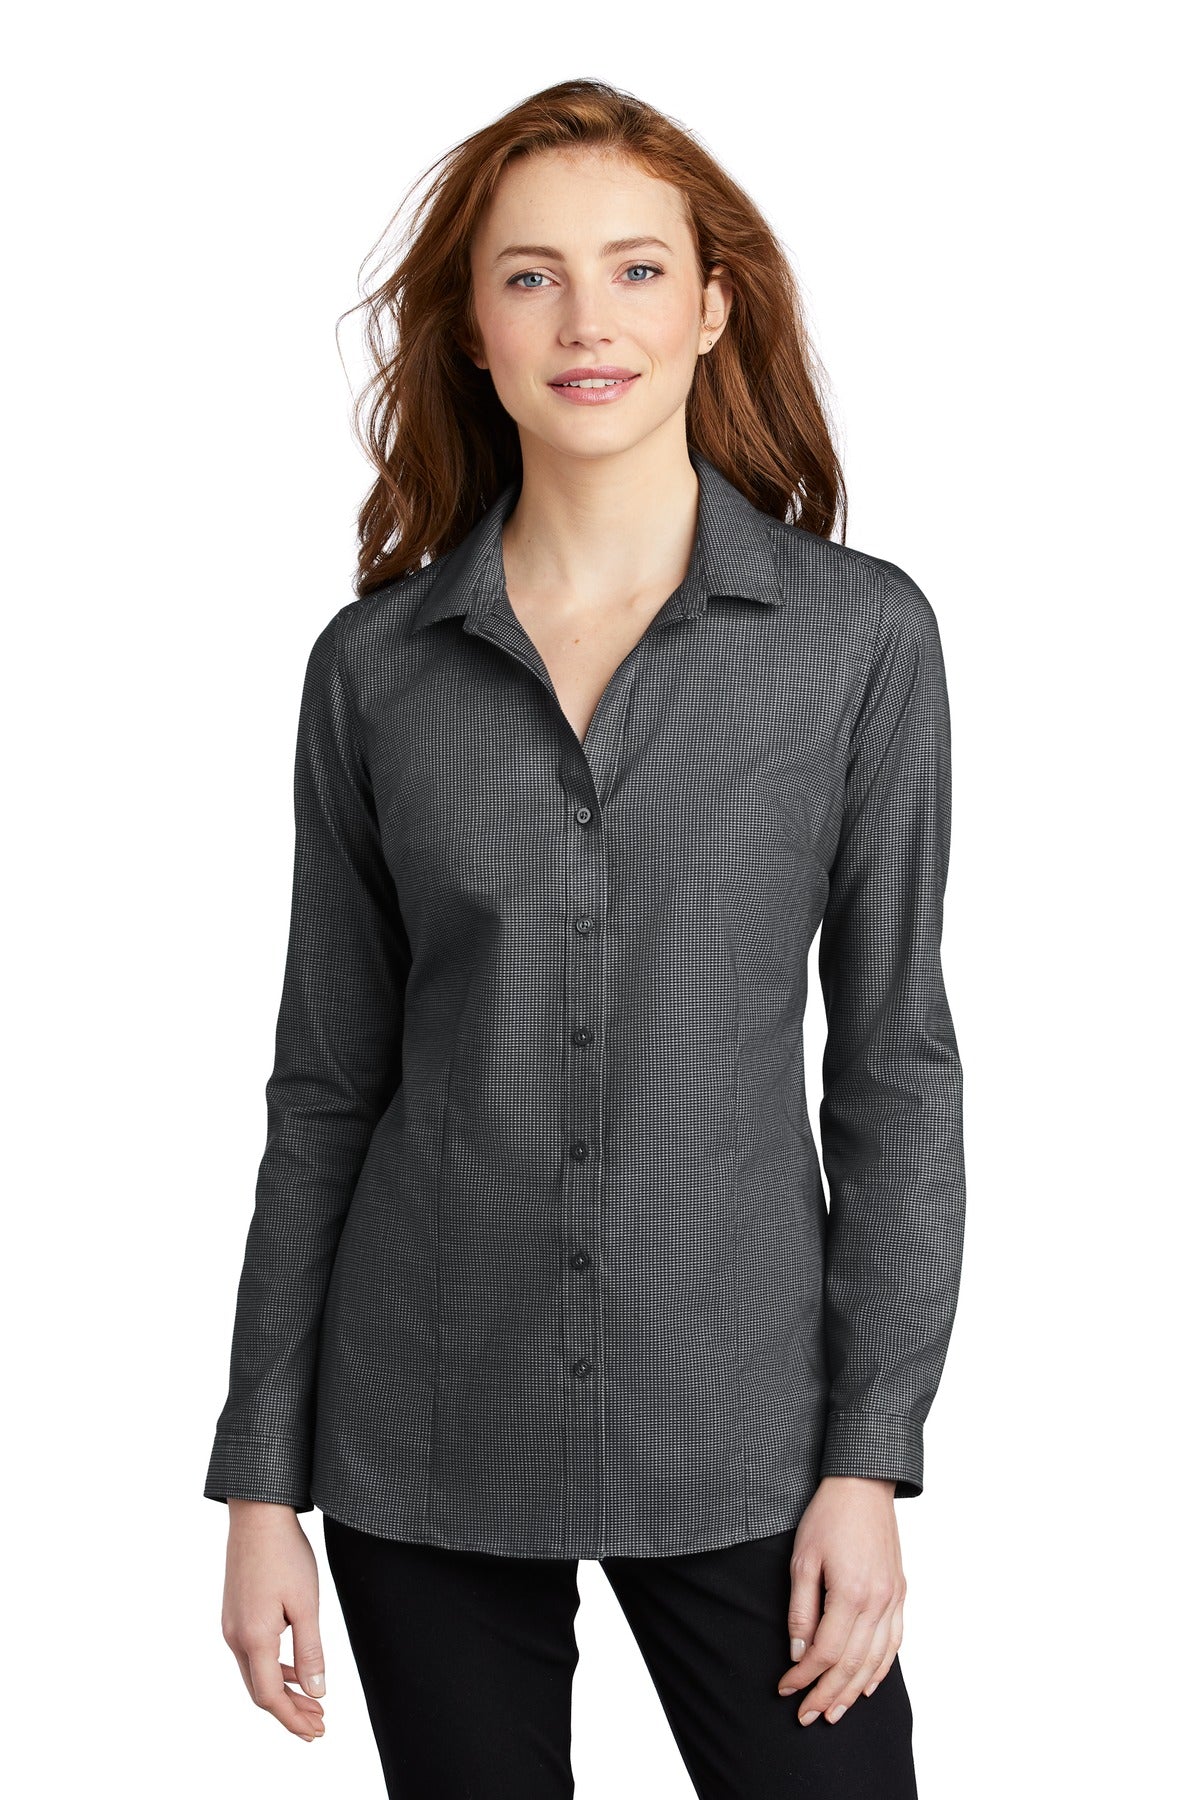 Port Authority Ladies Pincheck Easy Care Shirt LW645